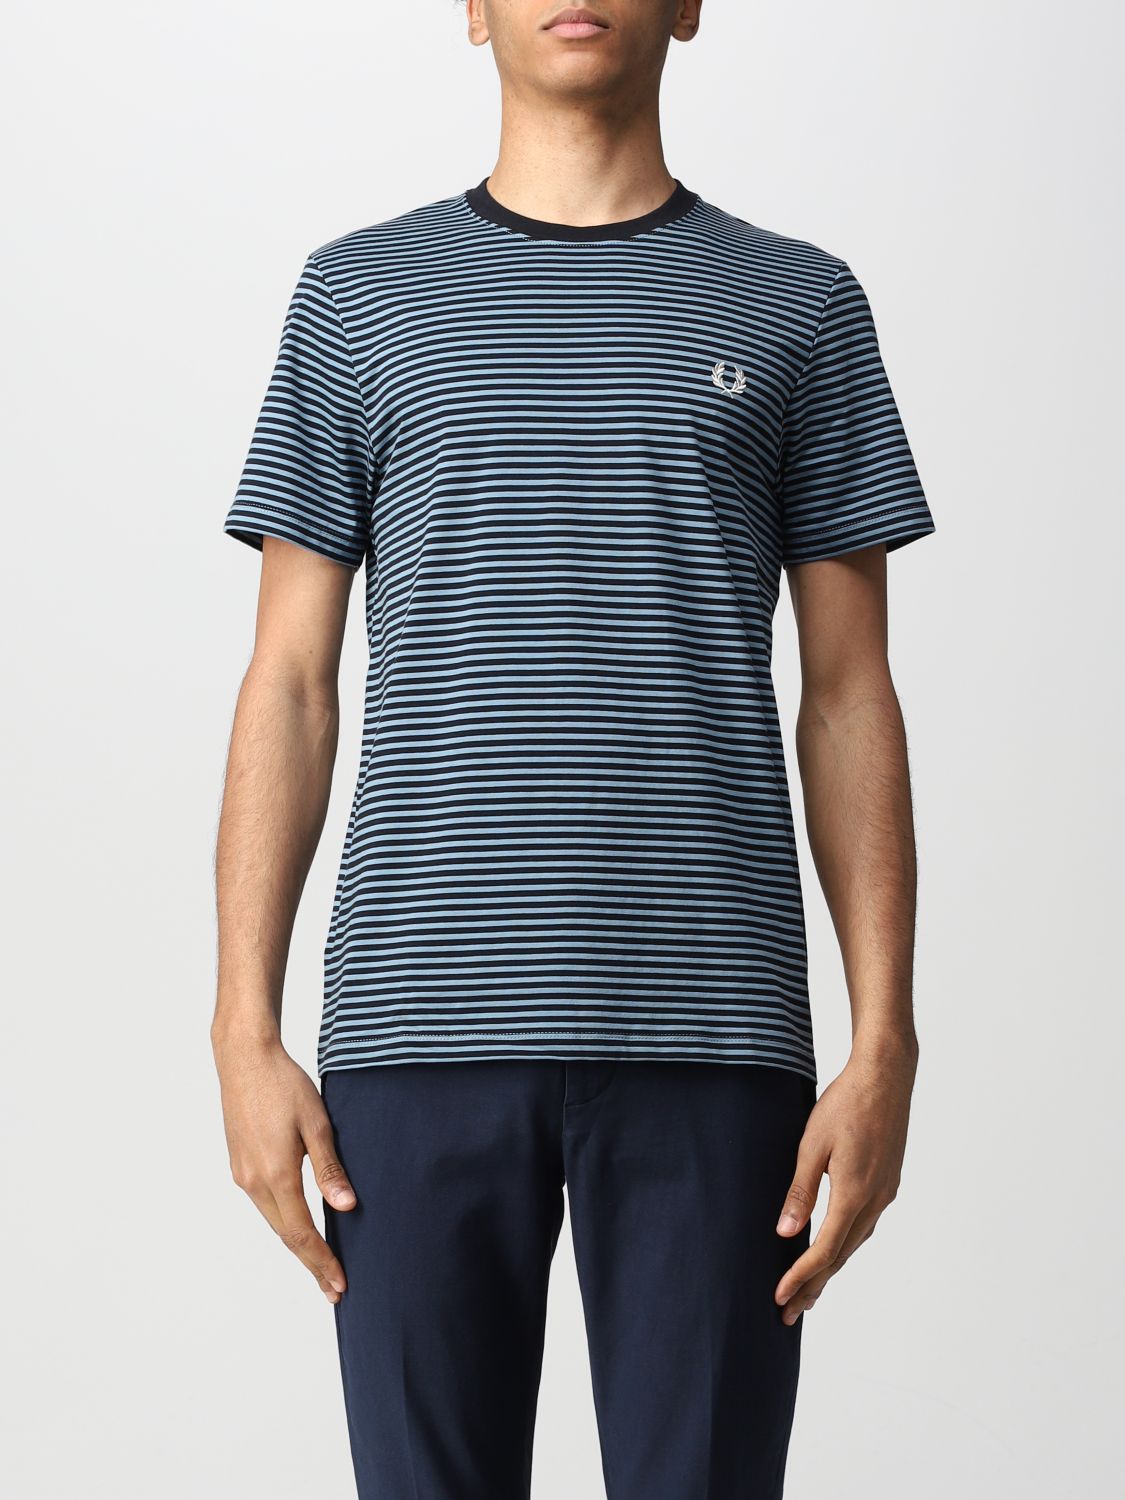 Tシャツ Fred Perry: Tシャツ メンズ Fred Perry ブルー 1